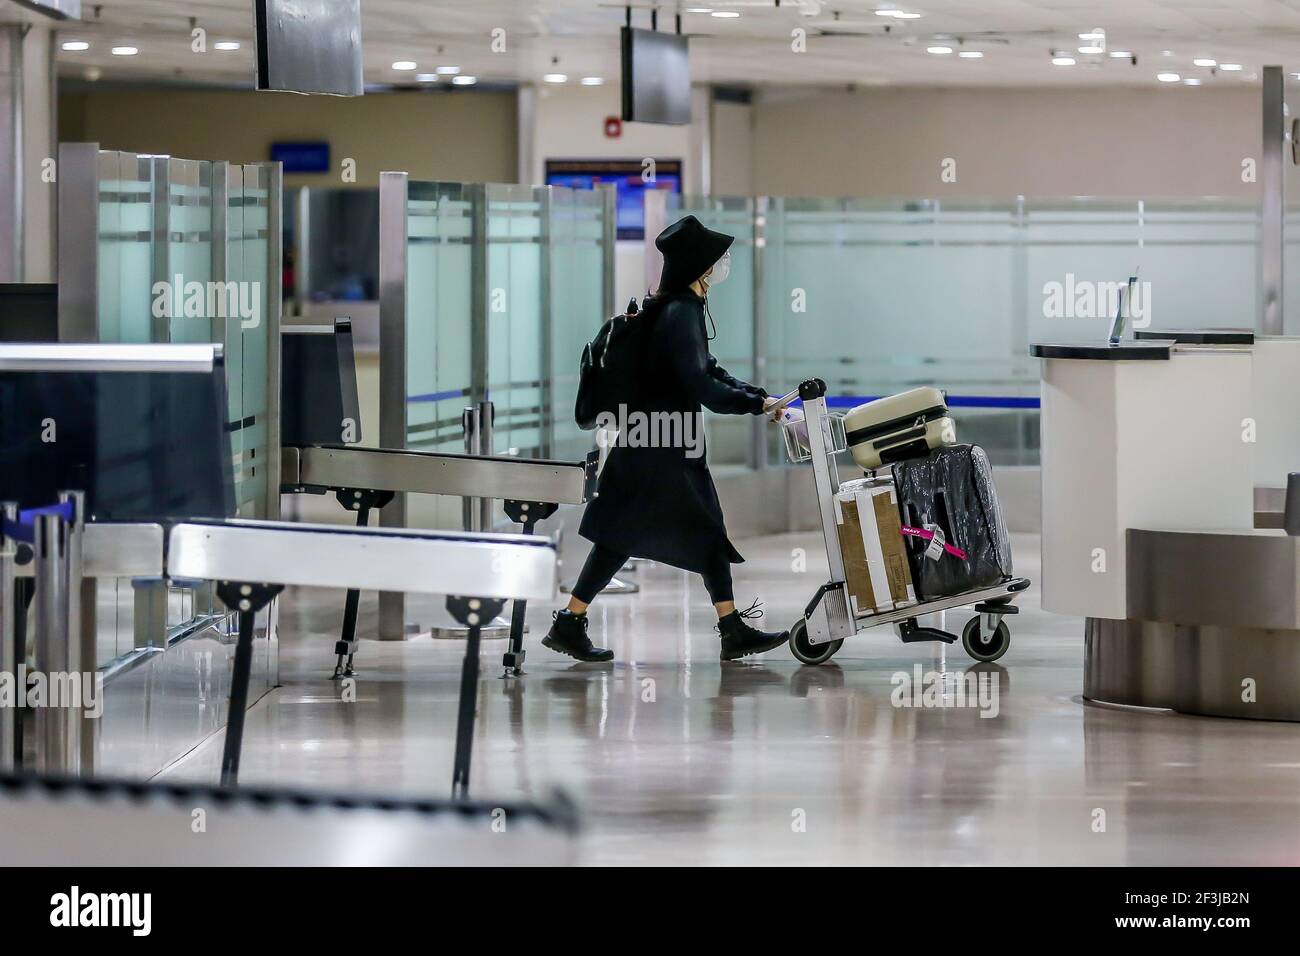 (210317) -- MANILA, March 17, 2021 (Xinhua) -- A passenger wearing a protective mask pushes a baggage cart after arriving at the Terminal 1 of the Ninoy Aquino International Airport in Manila, the Philippines, on March 17, 2021. The Philippines said it will temporarily suspend the entry of foreigners and some citizens as the Southeast Asian country battles a renewed spike in COVID-19 cases. In a statement issued on Tuesday night, the country's coronavirus task force said foreign citizens and returning nationals who had not been working overseas will not be able to enter the country from March Stock Photo